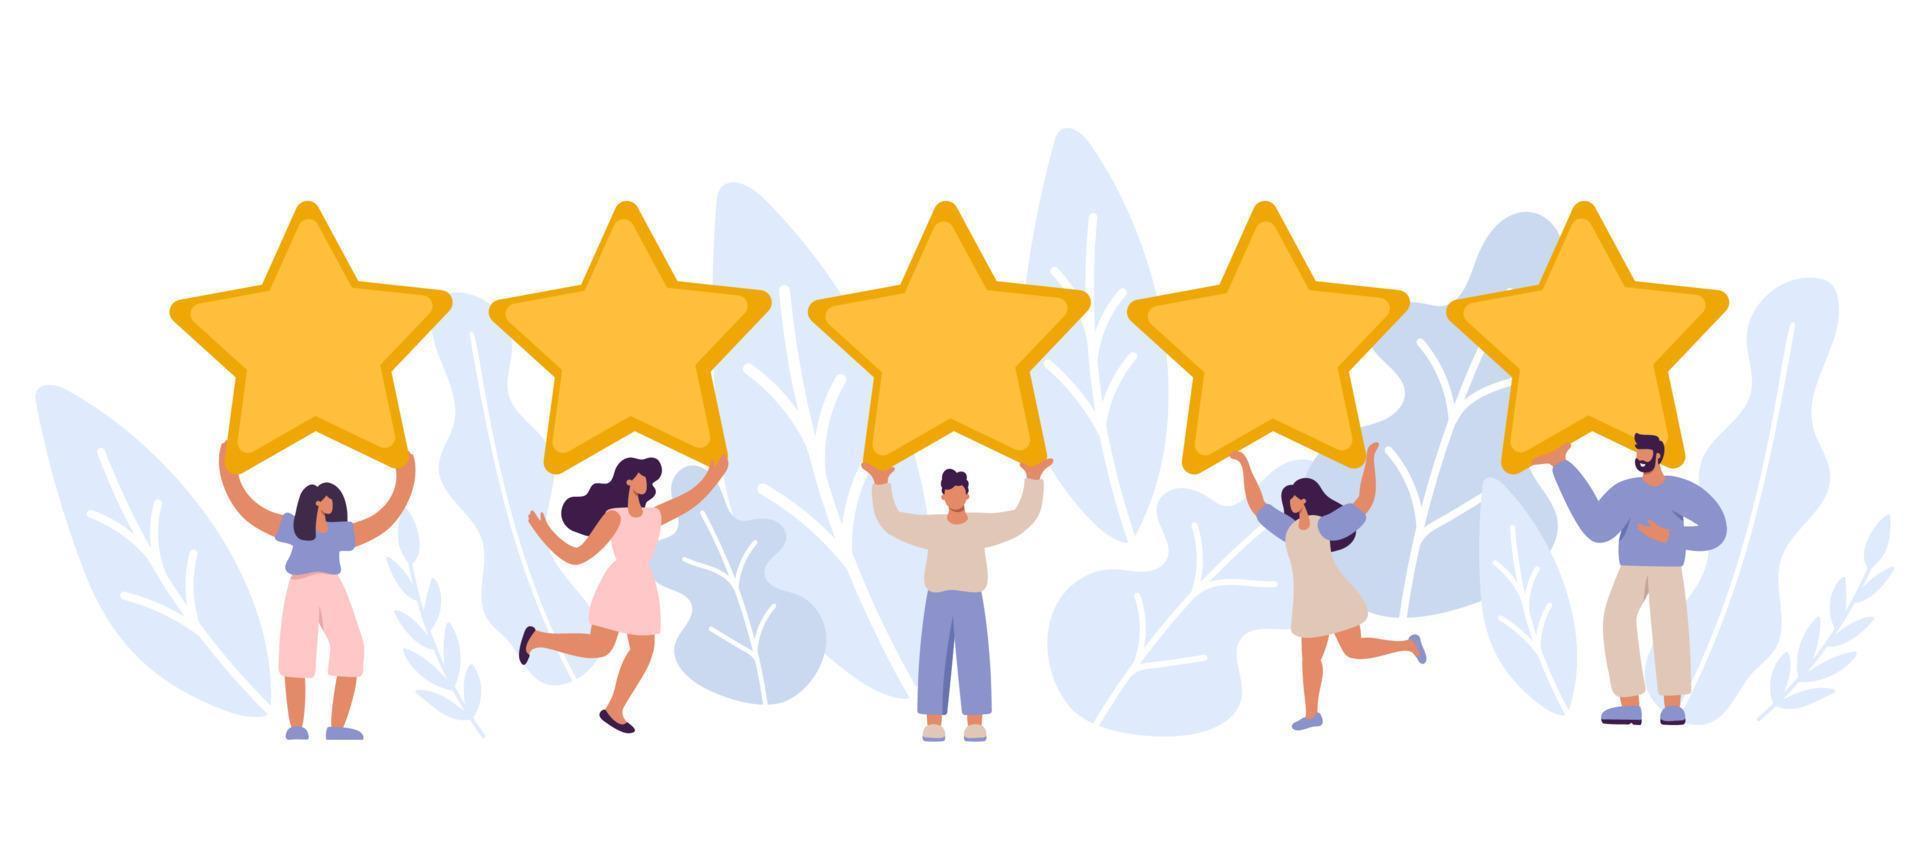 Happy and satisfied customer vector people are holding review stars over their heads. Five stars rating. Customer review rating and client feedback concept. Modern illustration